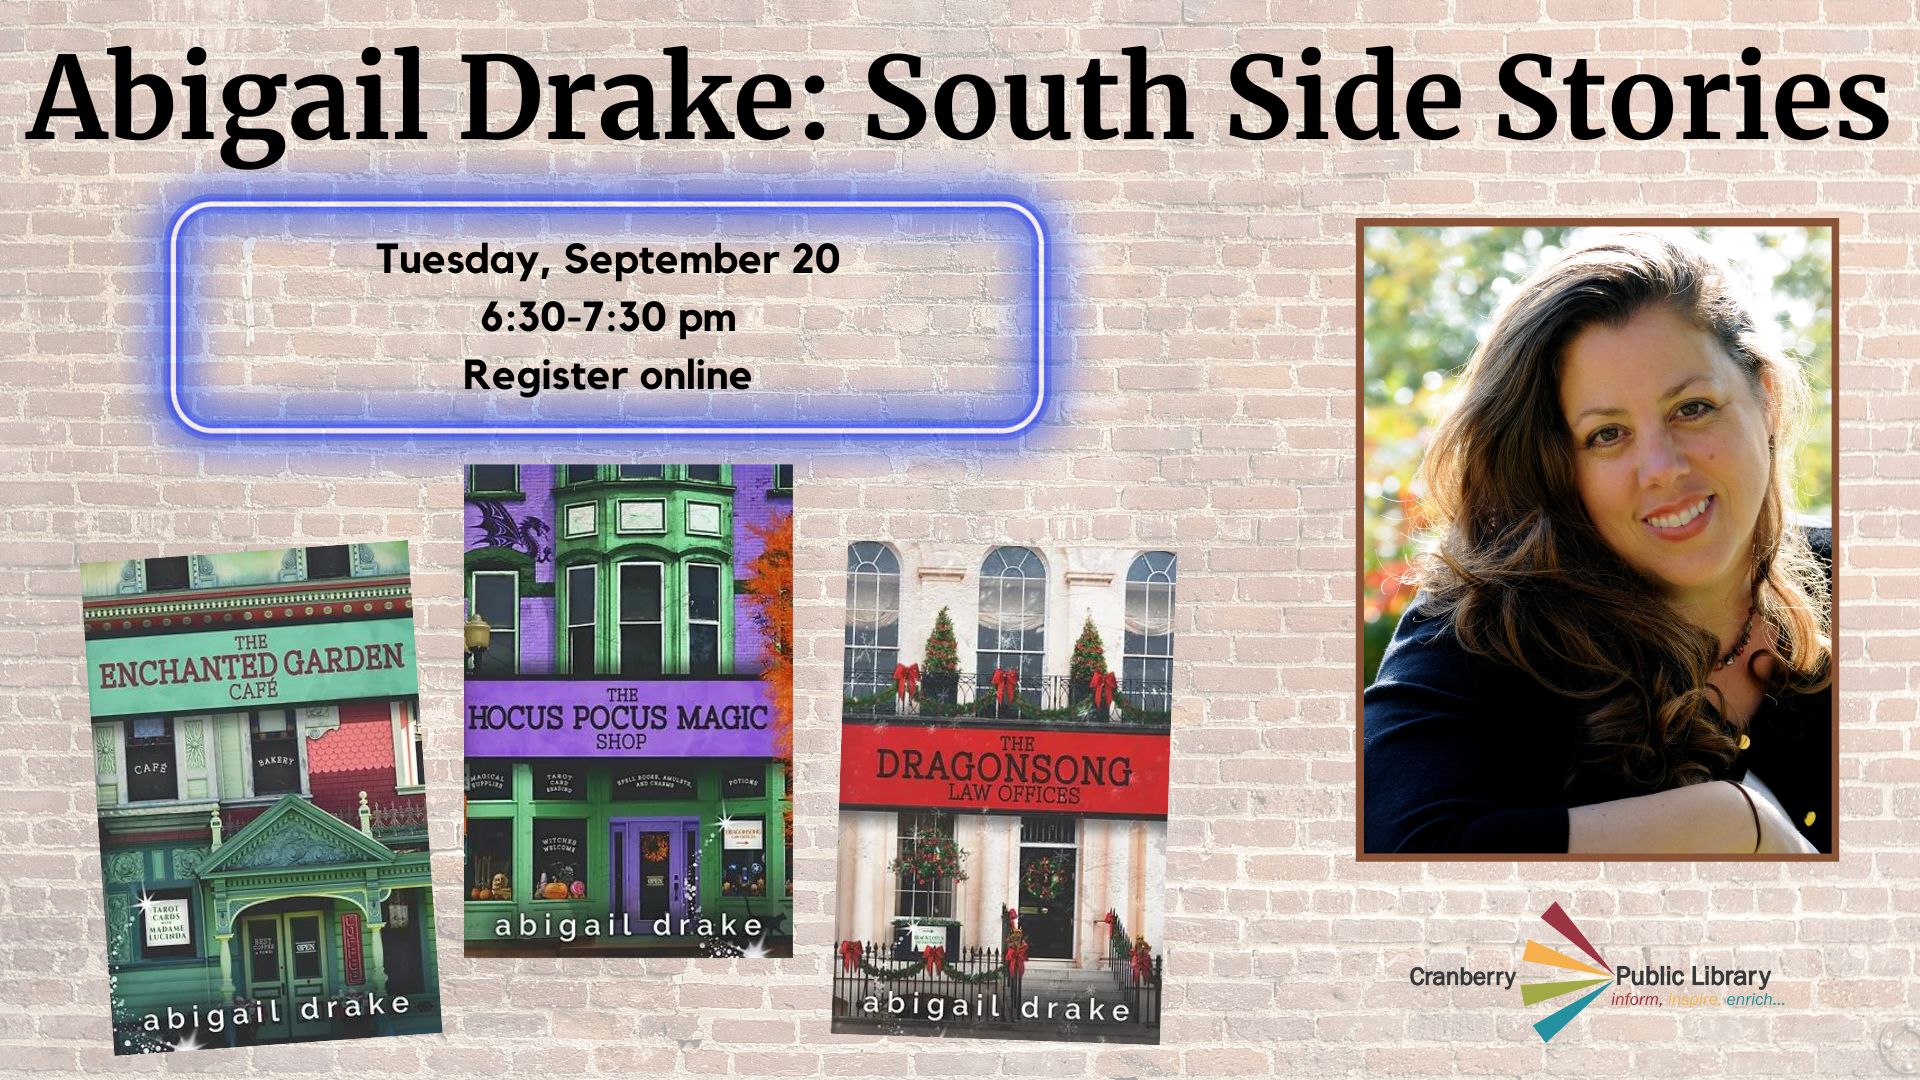 Flyer with photo of Abigail Drake and South Side Stories book covers 